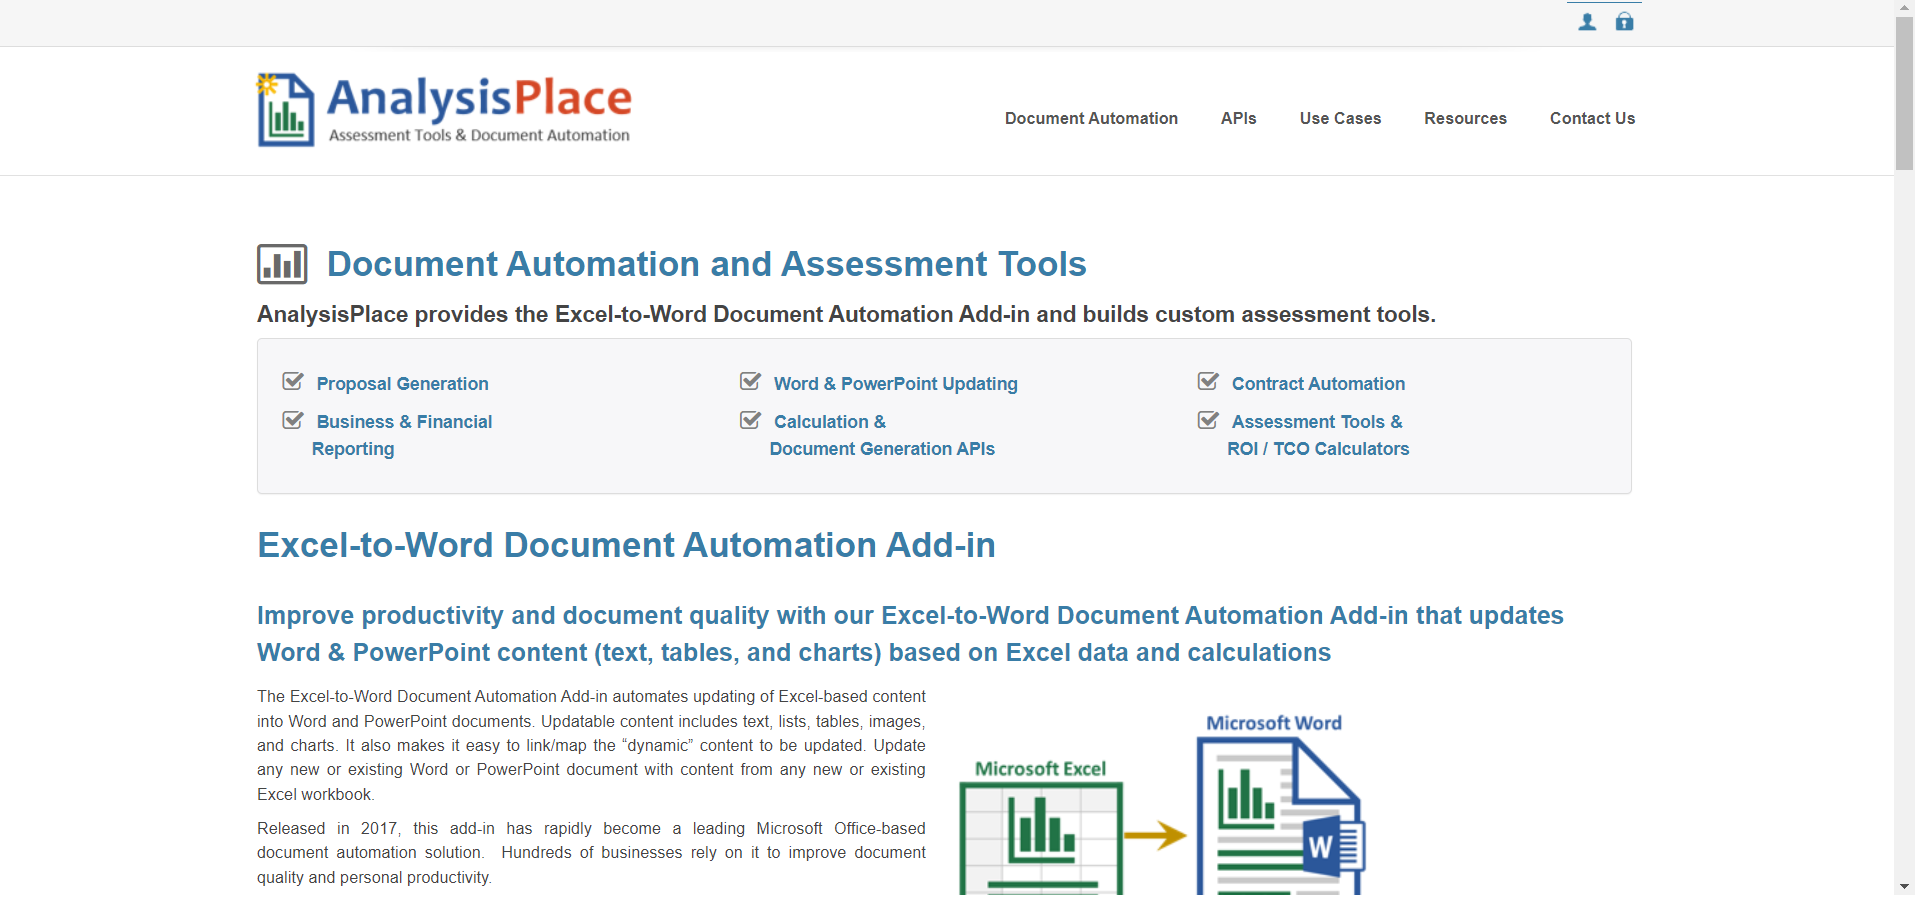 Screenshot of Analysis Place document automation website